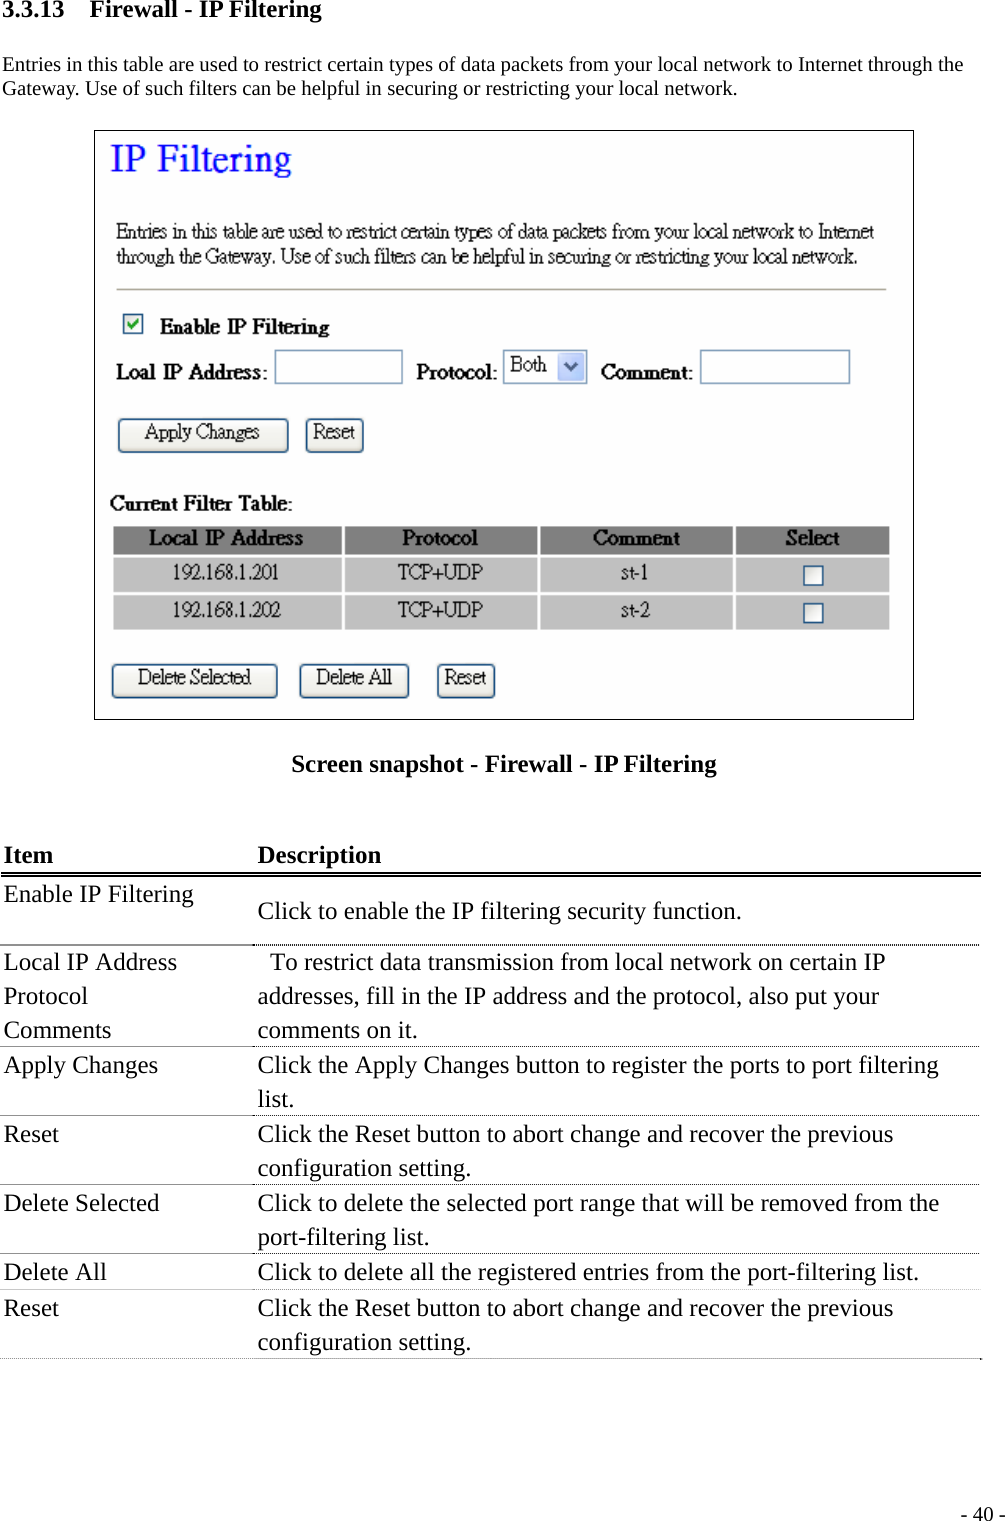 3.3.13    Firewall - IP Filtering Entries in this table are used to restrict certain types of data packets from your local network to Internet through the Gateway. Use of such filters can be helpful in securing or restricting your local network.  Screen snapshot - Firewall - IP Filtering  Item Description Enable IP Filtering  Click to enable the IP filtering security function. Local IP Address Protocol  Comments     To restrict data transmission from local network on certain IP addresses, fill in the IP address and the protocol, also put your comments on it. Apply Changes  Click the Apply Changes button to register the ports to port filtering list. Reset  Click the Reset button to abort change and recover the previous configuration setting. Delete Selected  Click to delete the selected port range that will be removed from the port-filtering list. Delete All  Click to delete all the registered entries from the port-filtering list. Reset  Click the Reset button to abort change and recover the previous configuration setting.   - 40 -